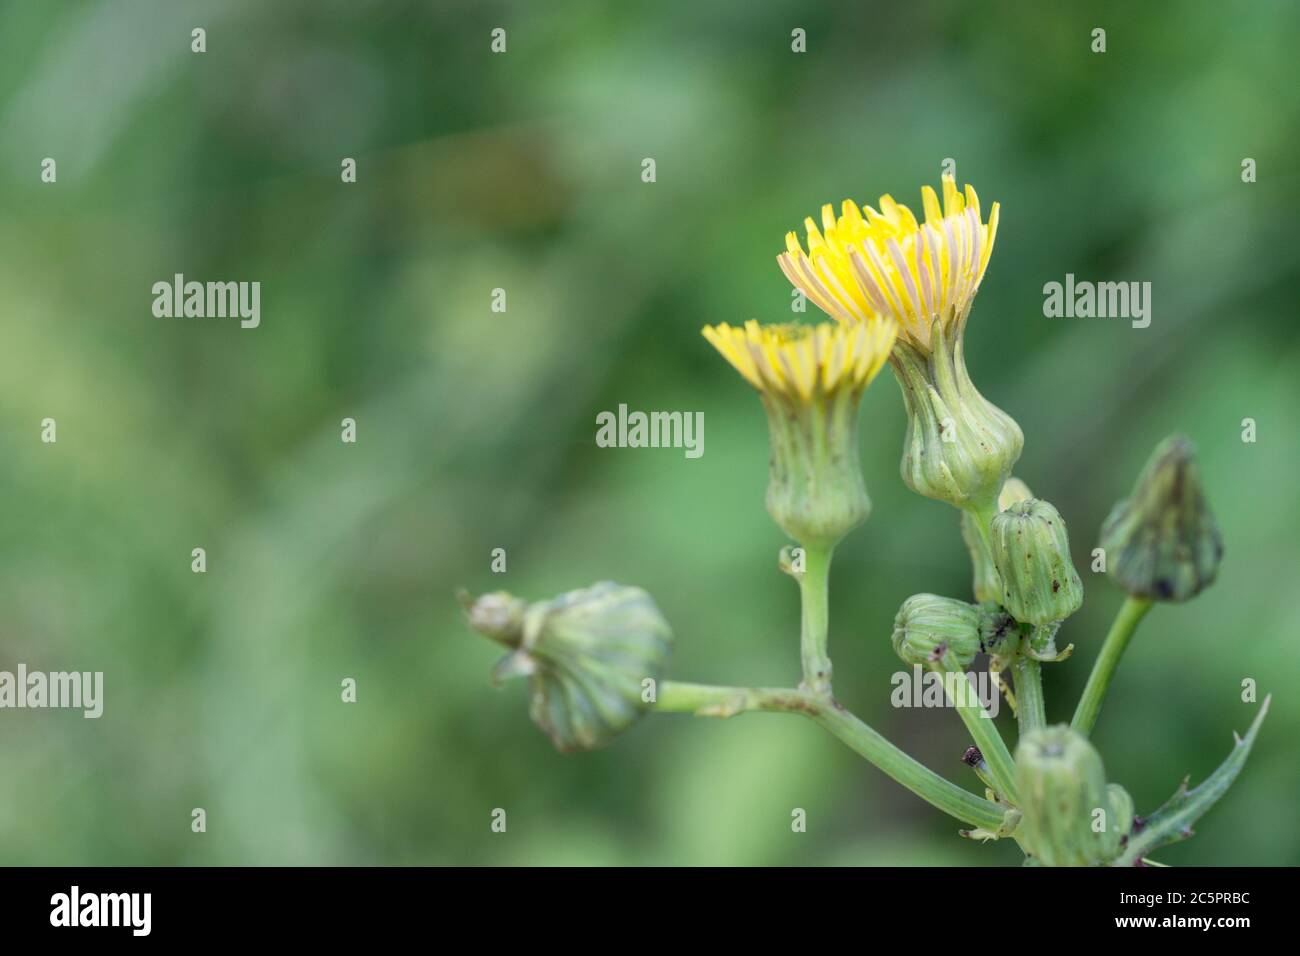 Flowers / flowering top of Smooth Sow-Thistle / Sonchus oleraceus. Young leaves edible & used as medicinal herb. Common UK / European weed. Stock Photo